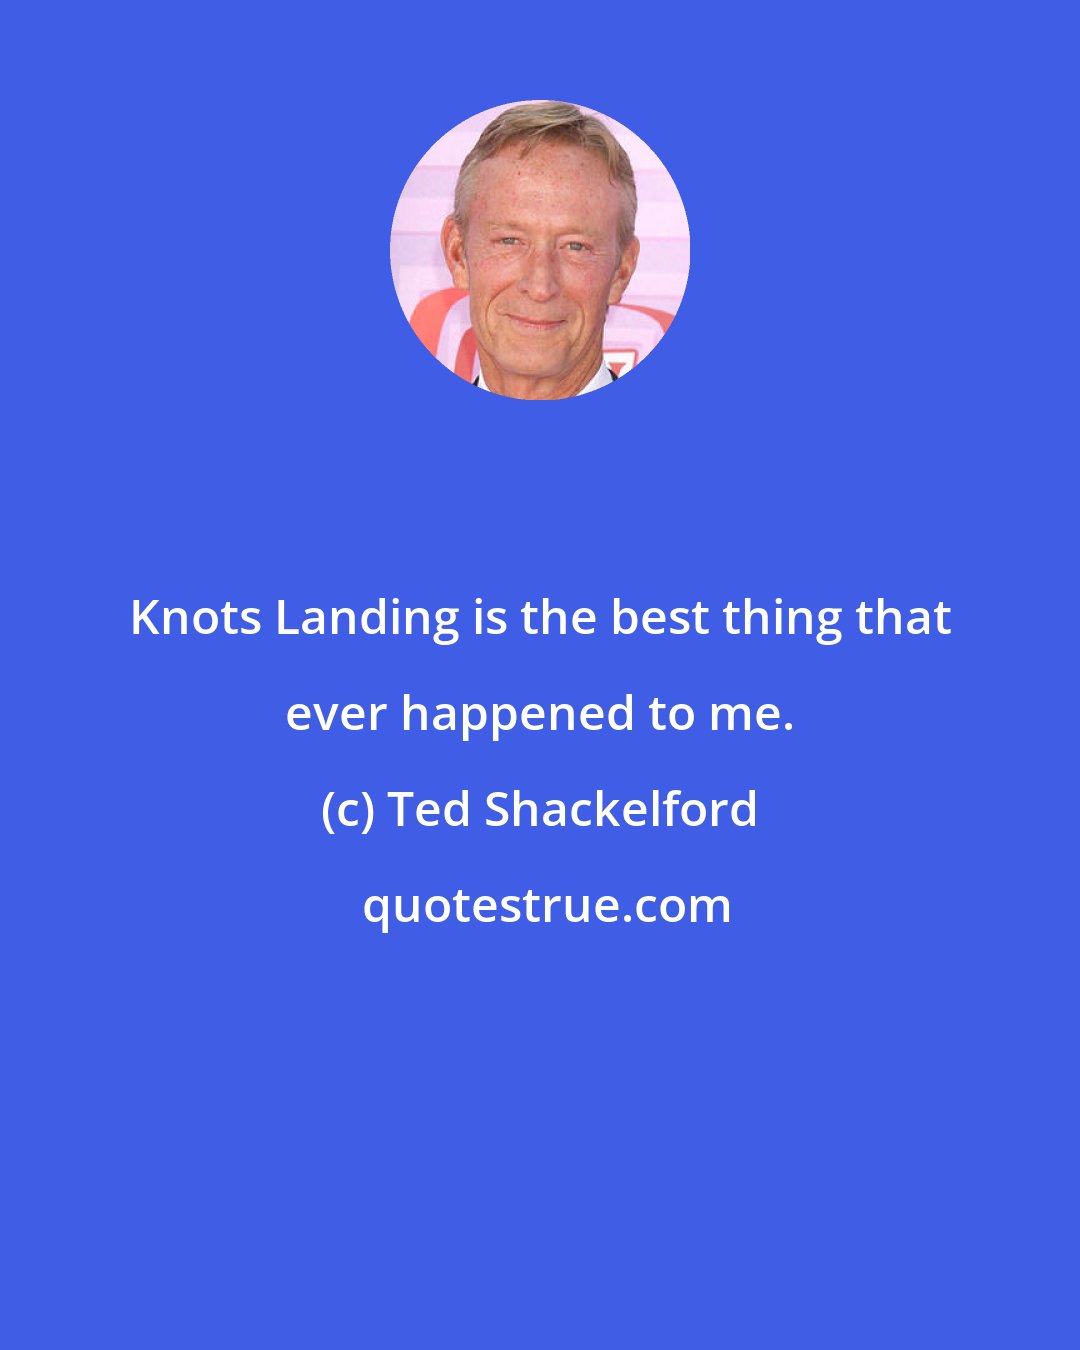 Ted Shackelford: Knots Landing is the best thing that ever happened to me.